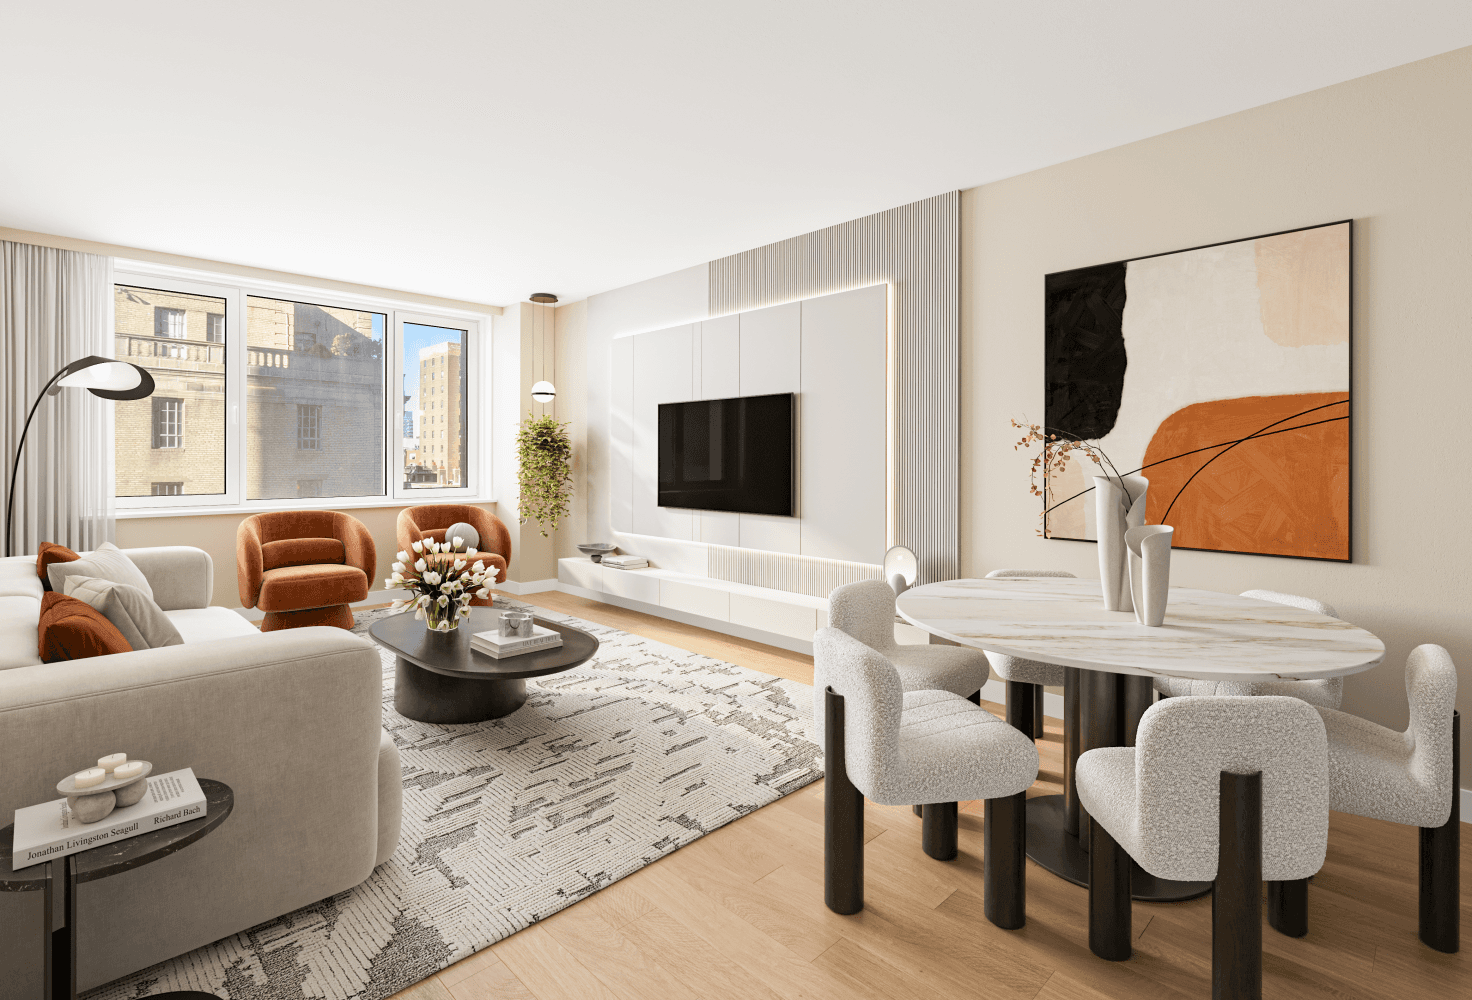 Indulge in breathtaking sunsets and stunning Hudson River views from this elegant 2 bedroom, 2 bathroom apartment at the Sheffield Condominium, one of Billionaires Row's prestigious amenity packed condominiums.